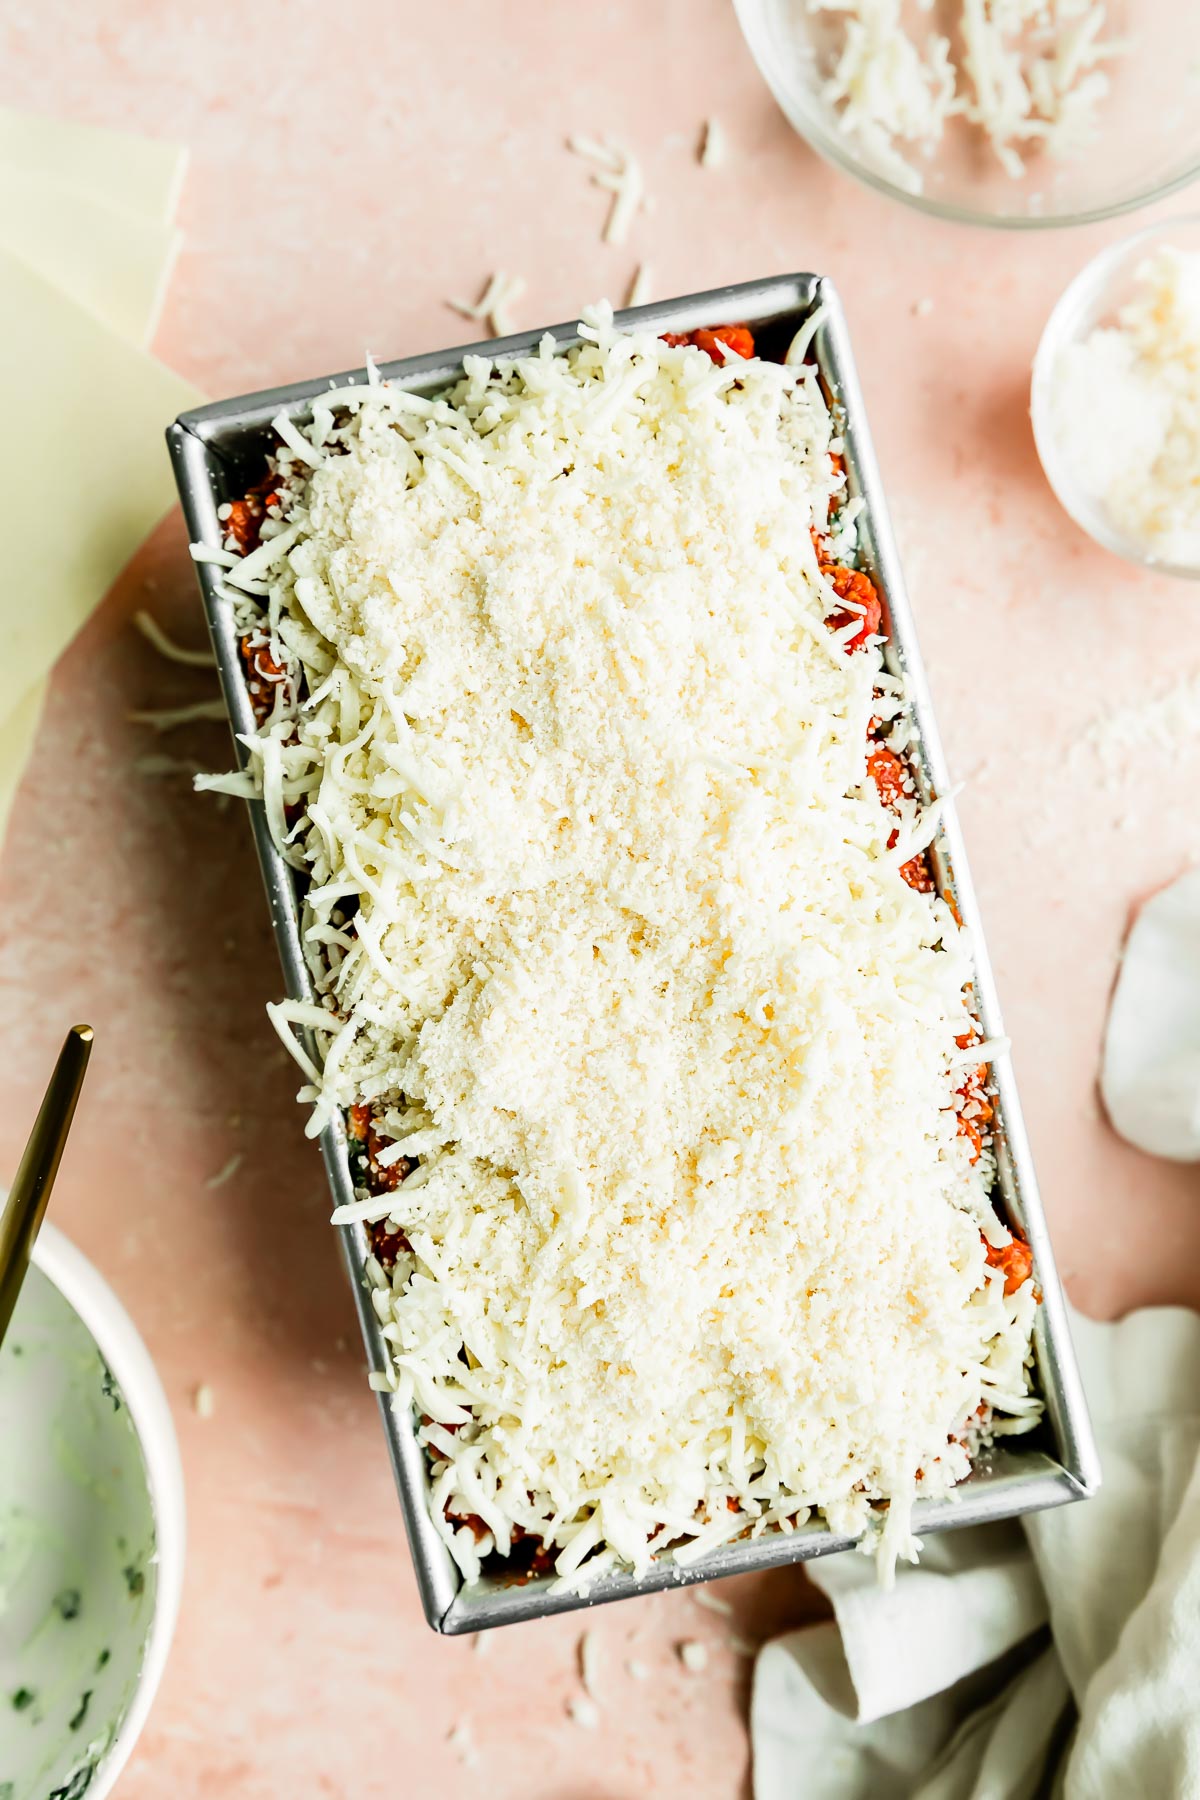 An assembled small batch lasagna is made inside of a loaf pan. The loaf pan sits atop a light pink surface and is surrounded by a bowl that was filled with spinach ricotta filling, a bowl of shredded mozzarella cheese, a small pinch bowl filled with grated parmesan cheese, lasagna sheets, and a light colored linen napkin.